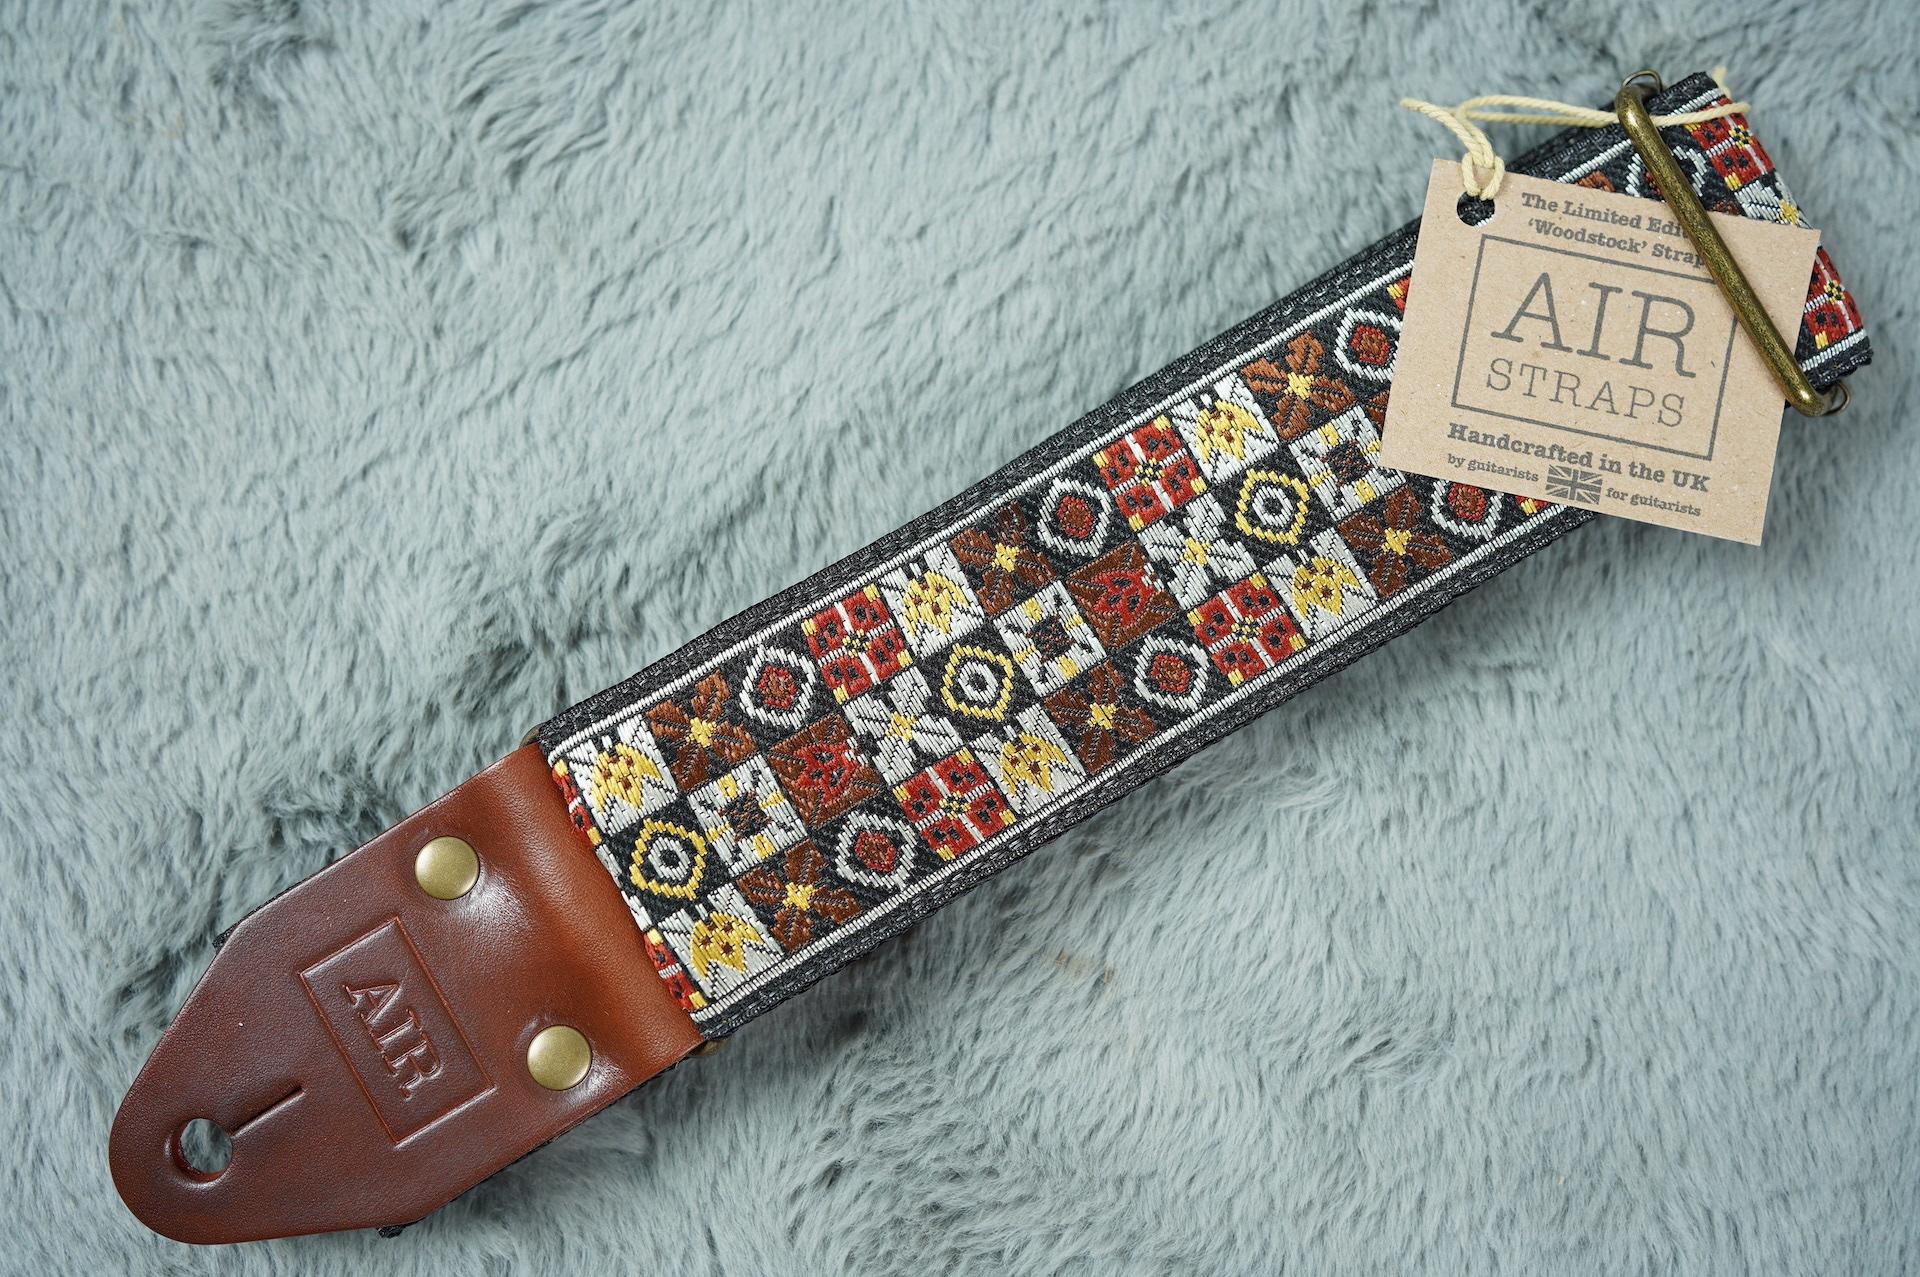 Air Straps Limited Edition 'Woodstock' Guitar Strap